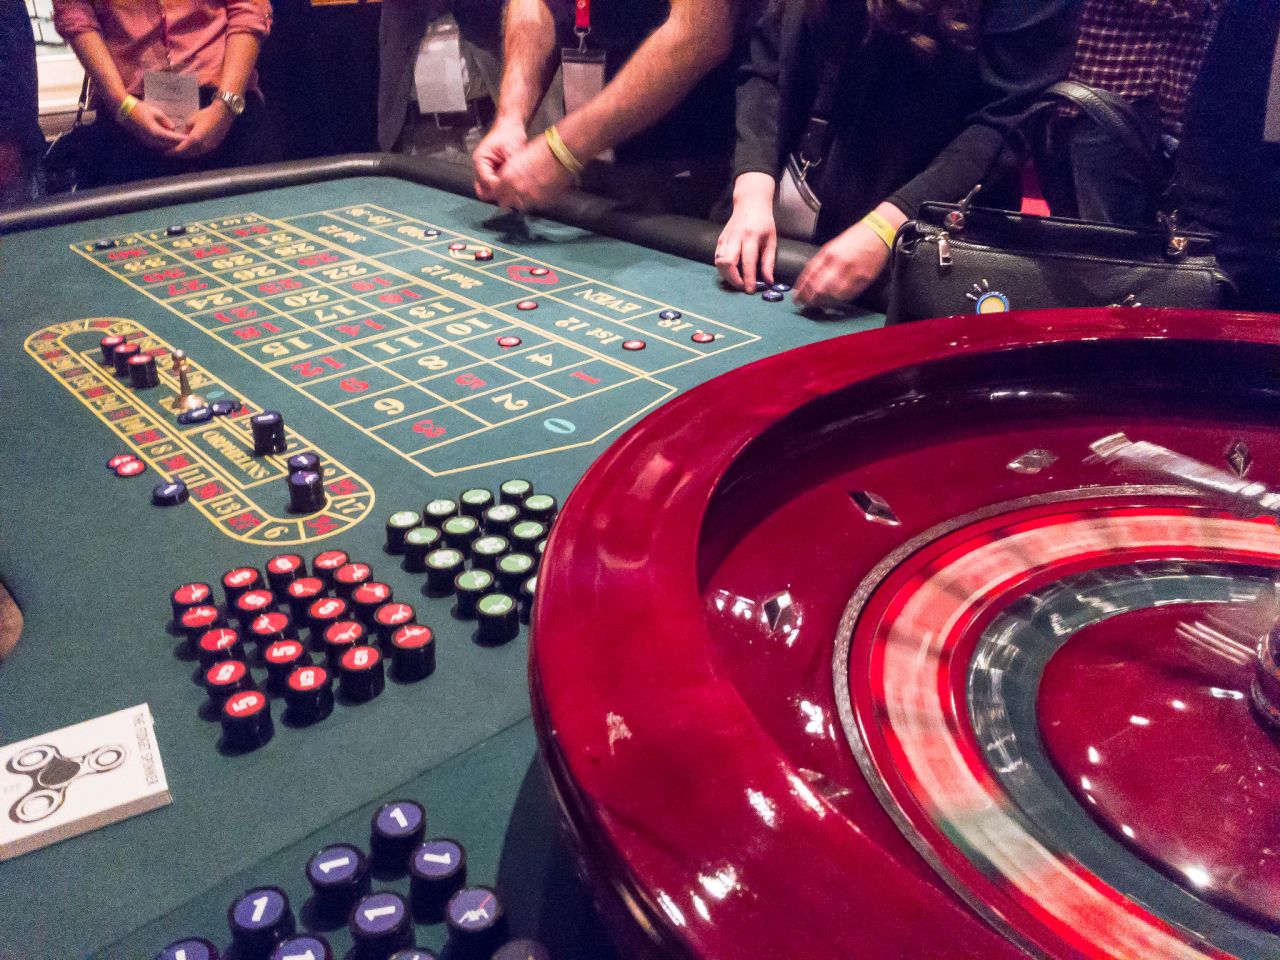 10 Best Casinos In Canada That Will Make You Go Crazy